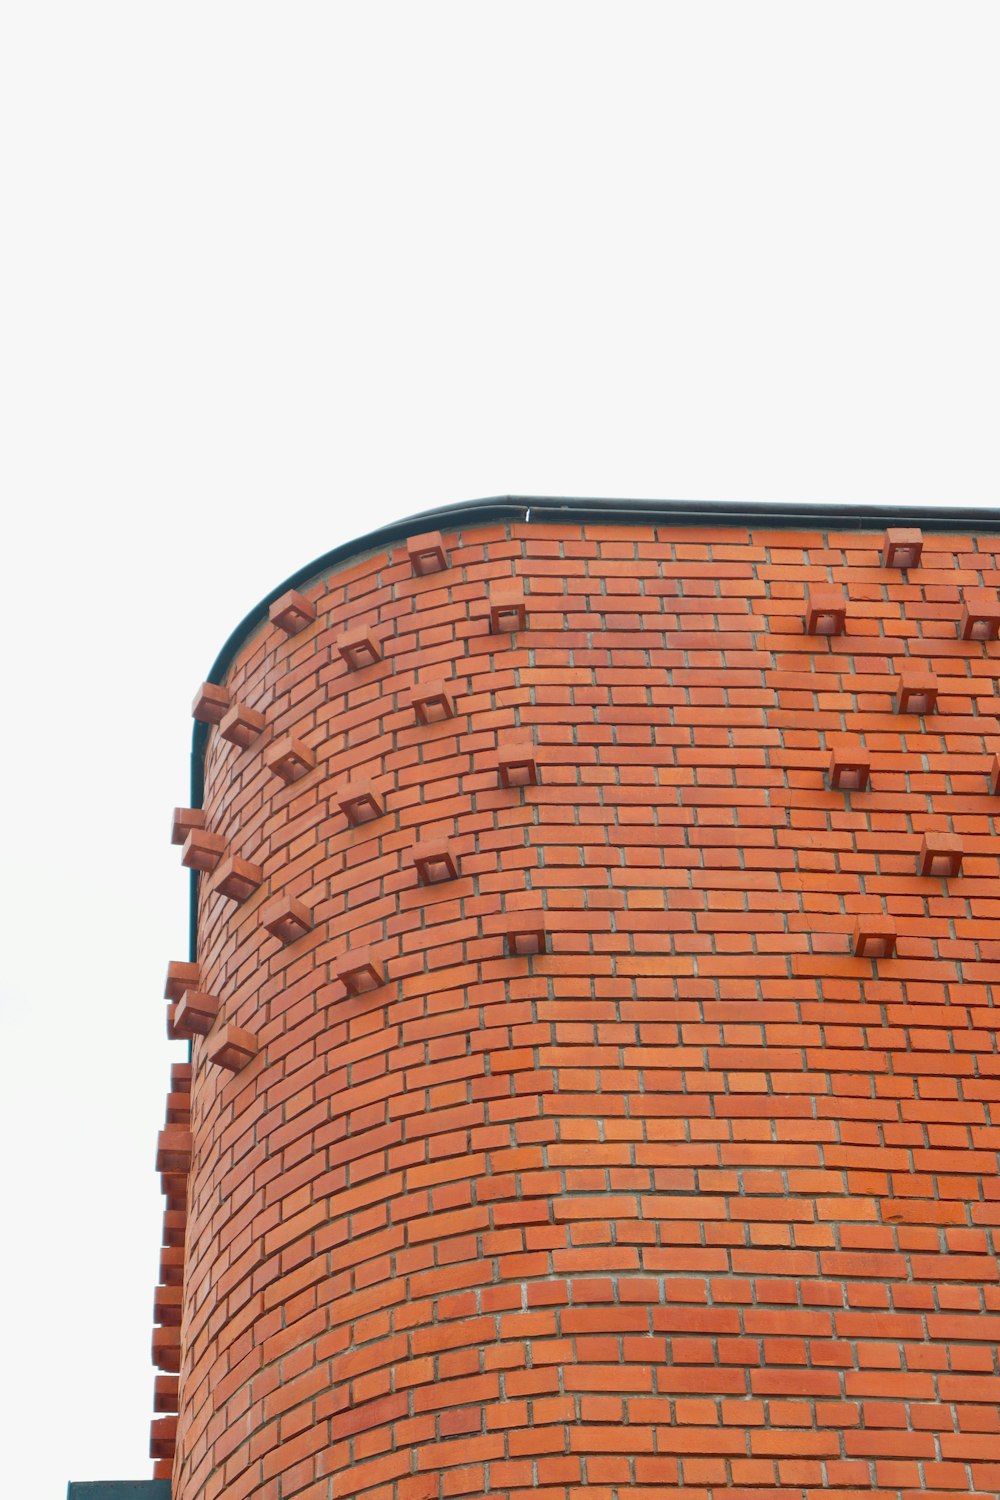 a red brick building with a clock on the top of it